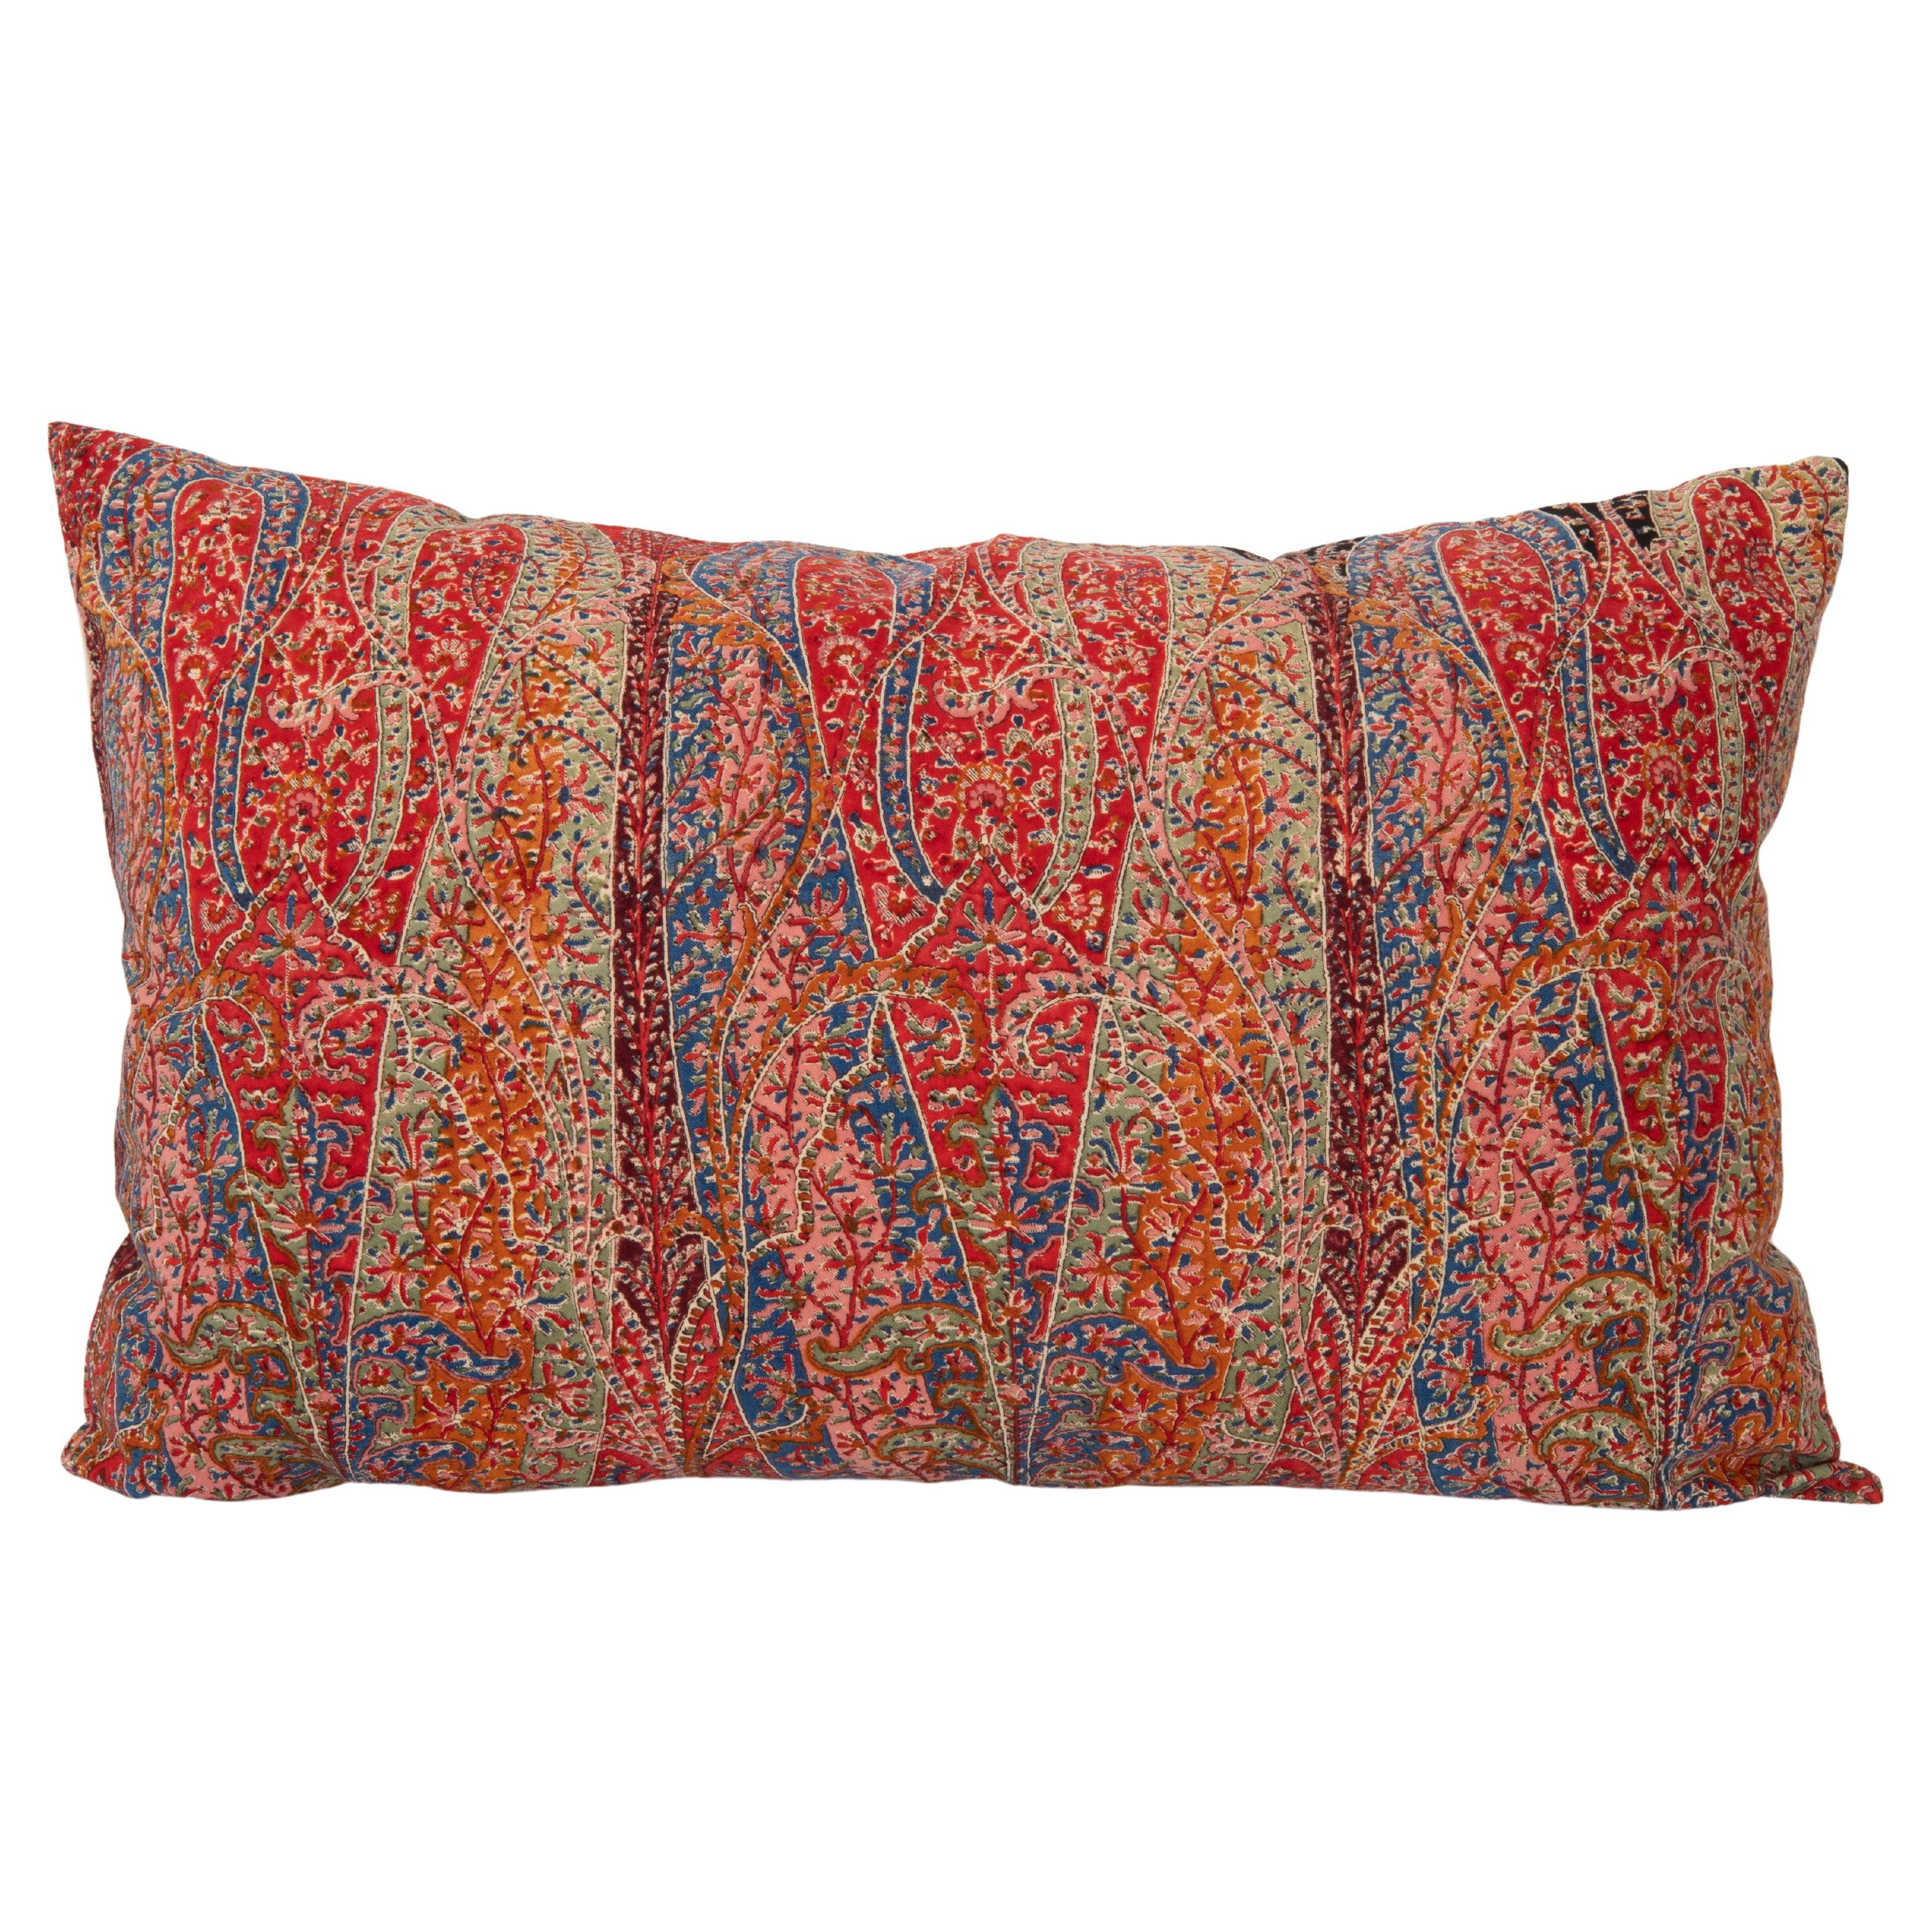 Pillow Cover Made from a an Antique Printed Scottish Paisley Shawl   